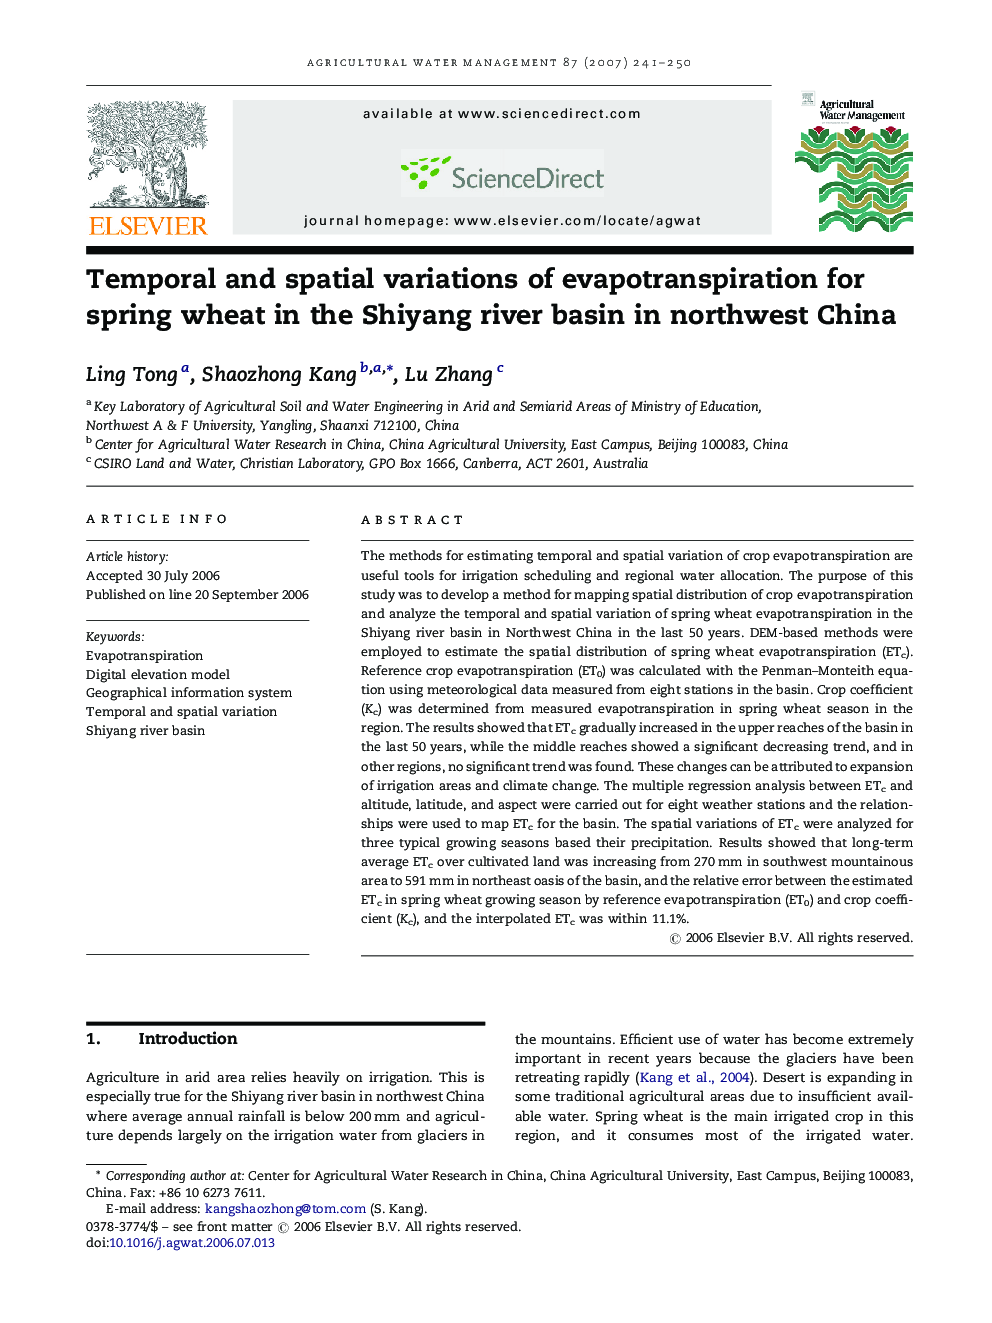 Temporal and spatial variations of evapotranspiration for spring wheat in the Shiyang river basin in northwest China